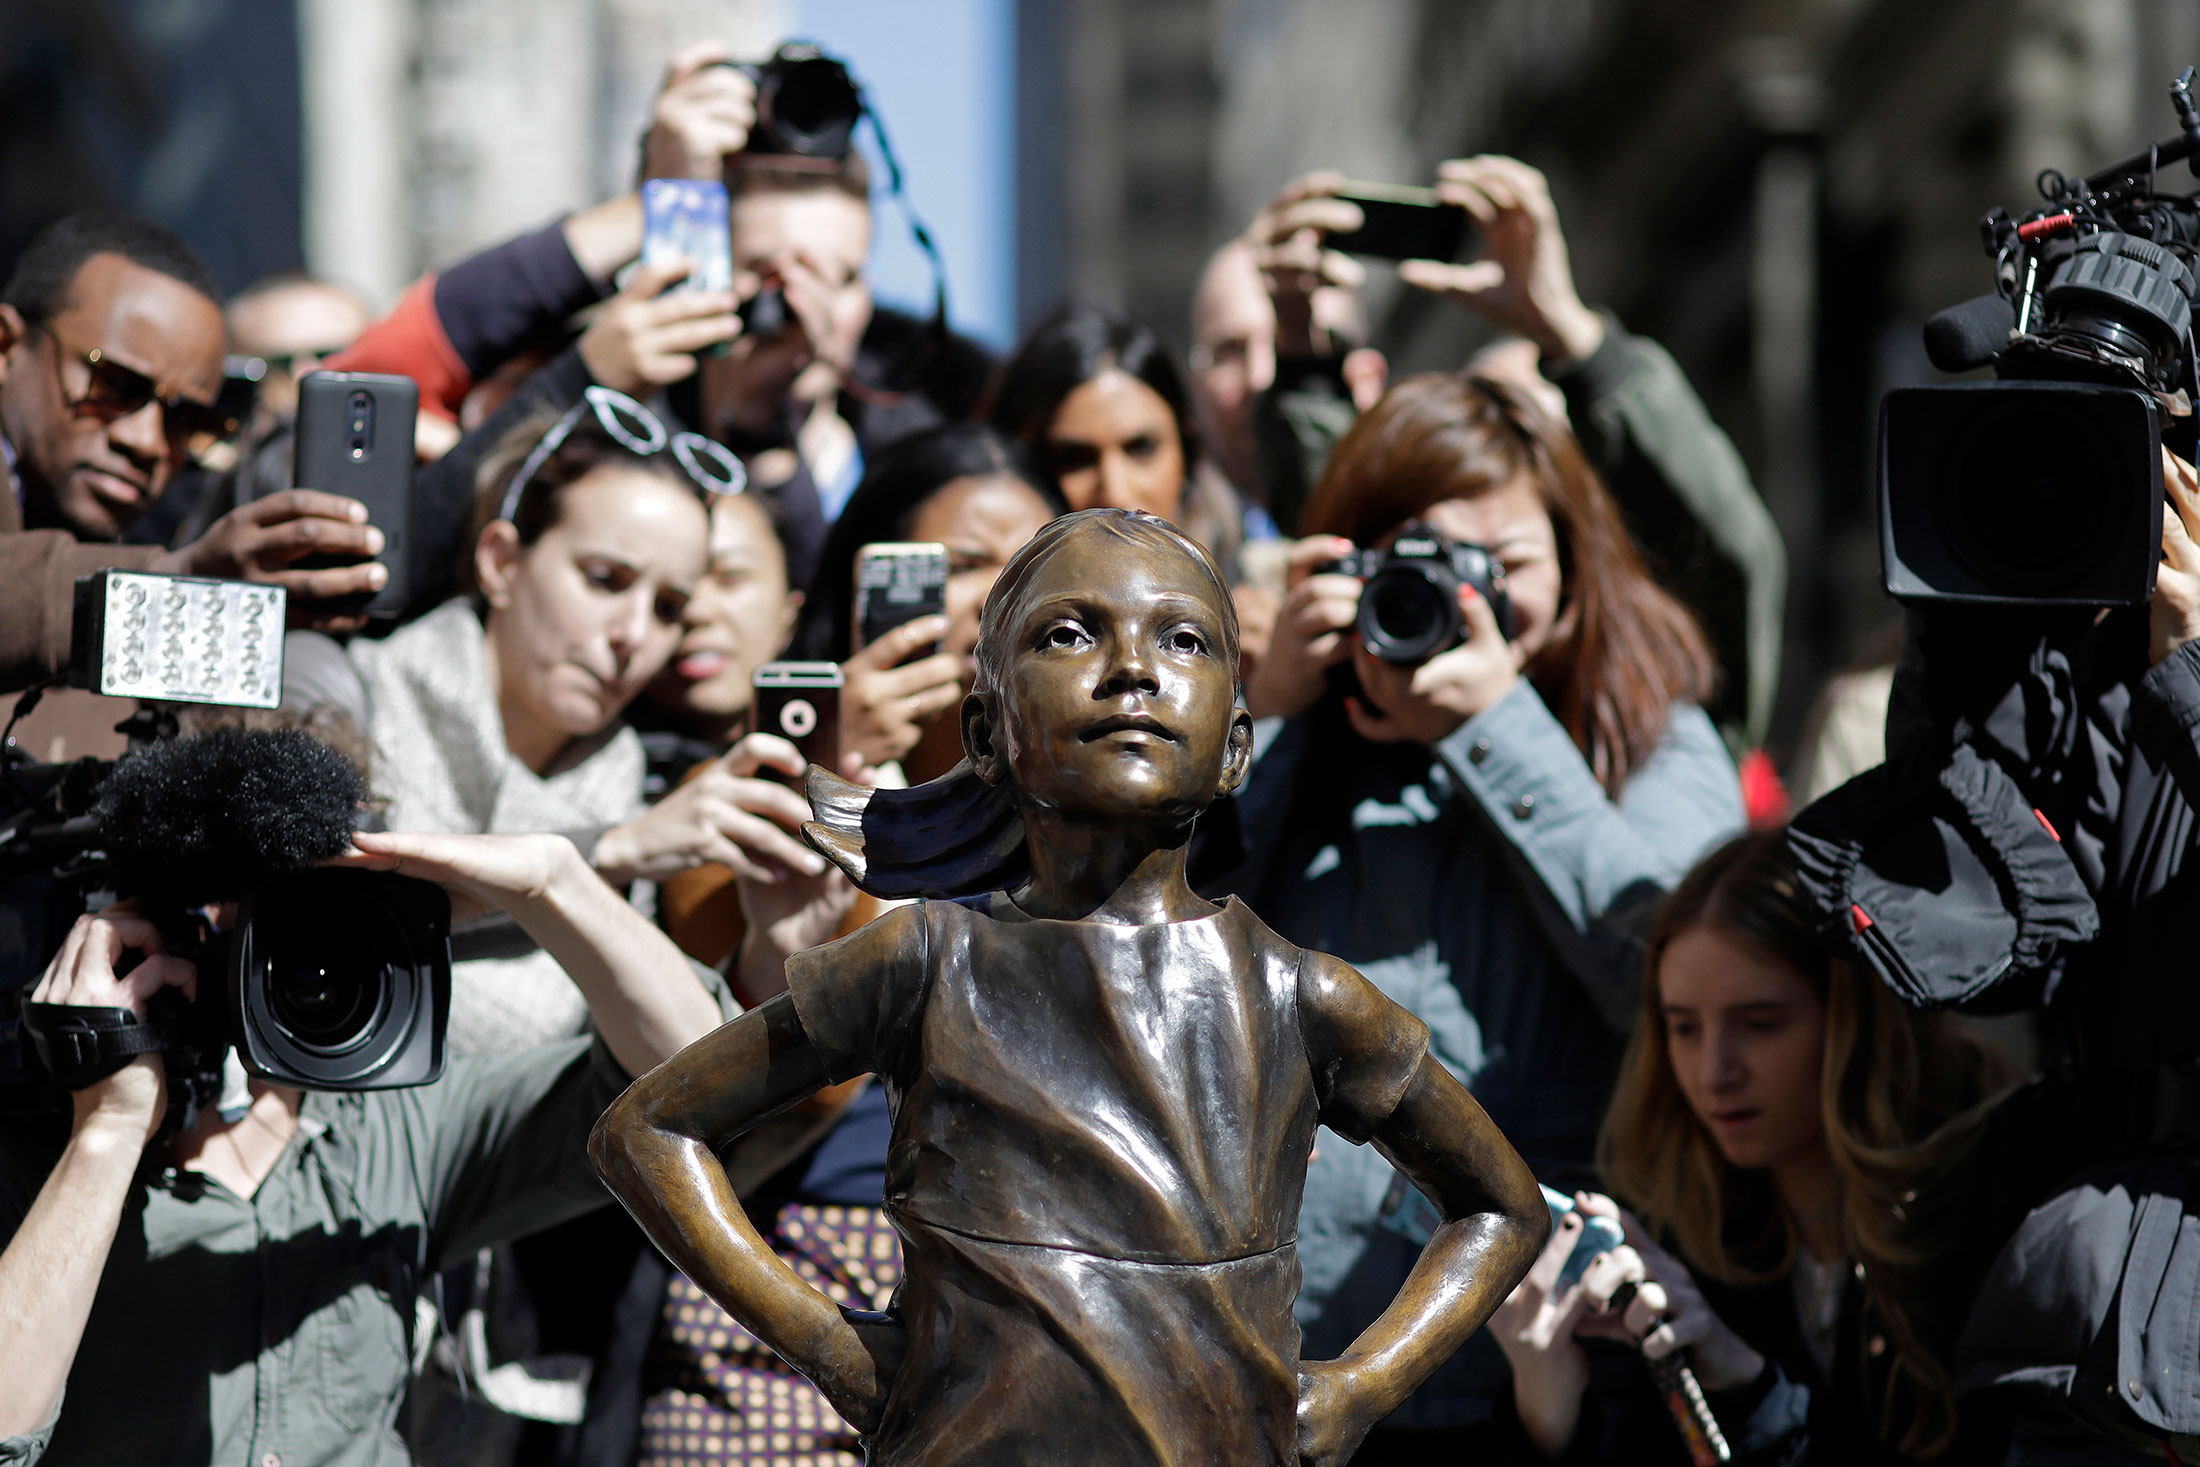 The “Fearless Girl” statue on March 8, 2017, in New York.
